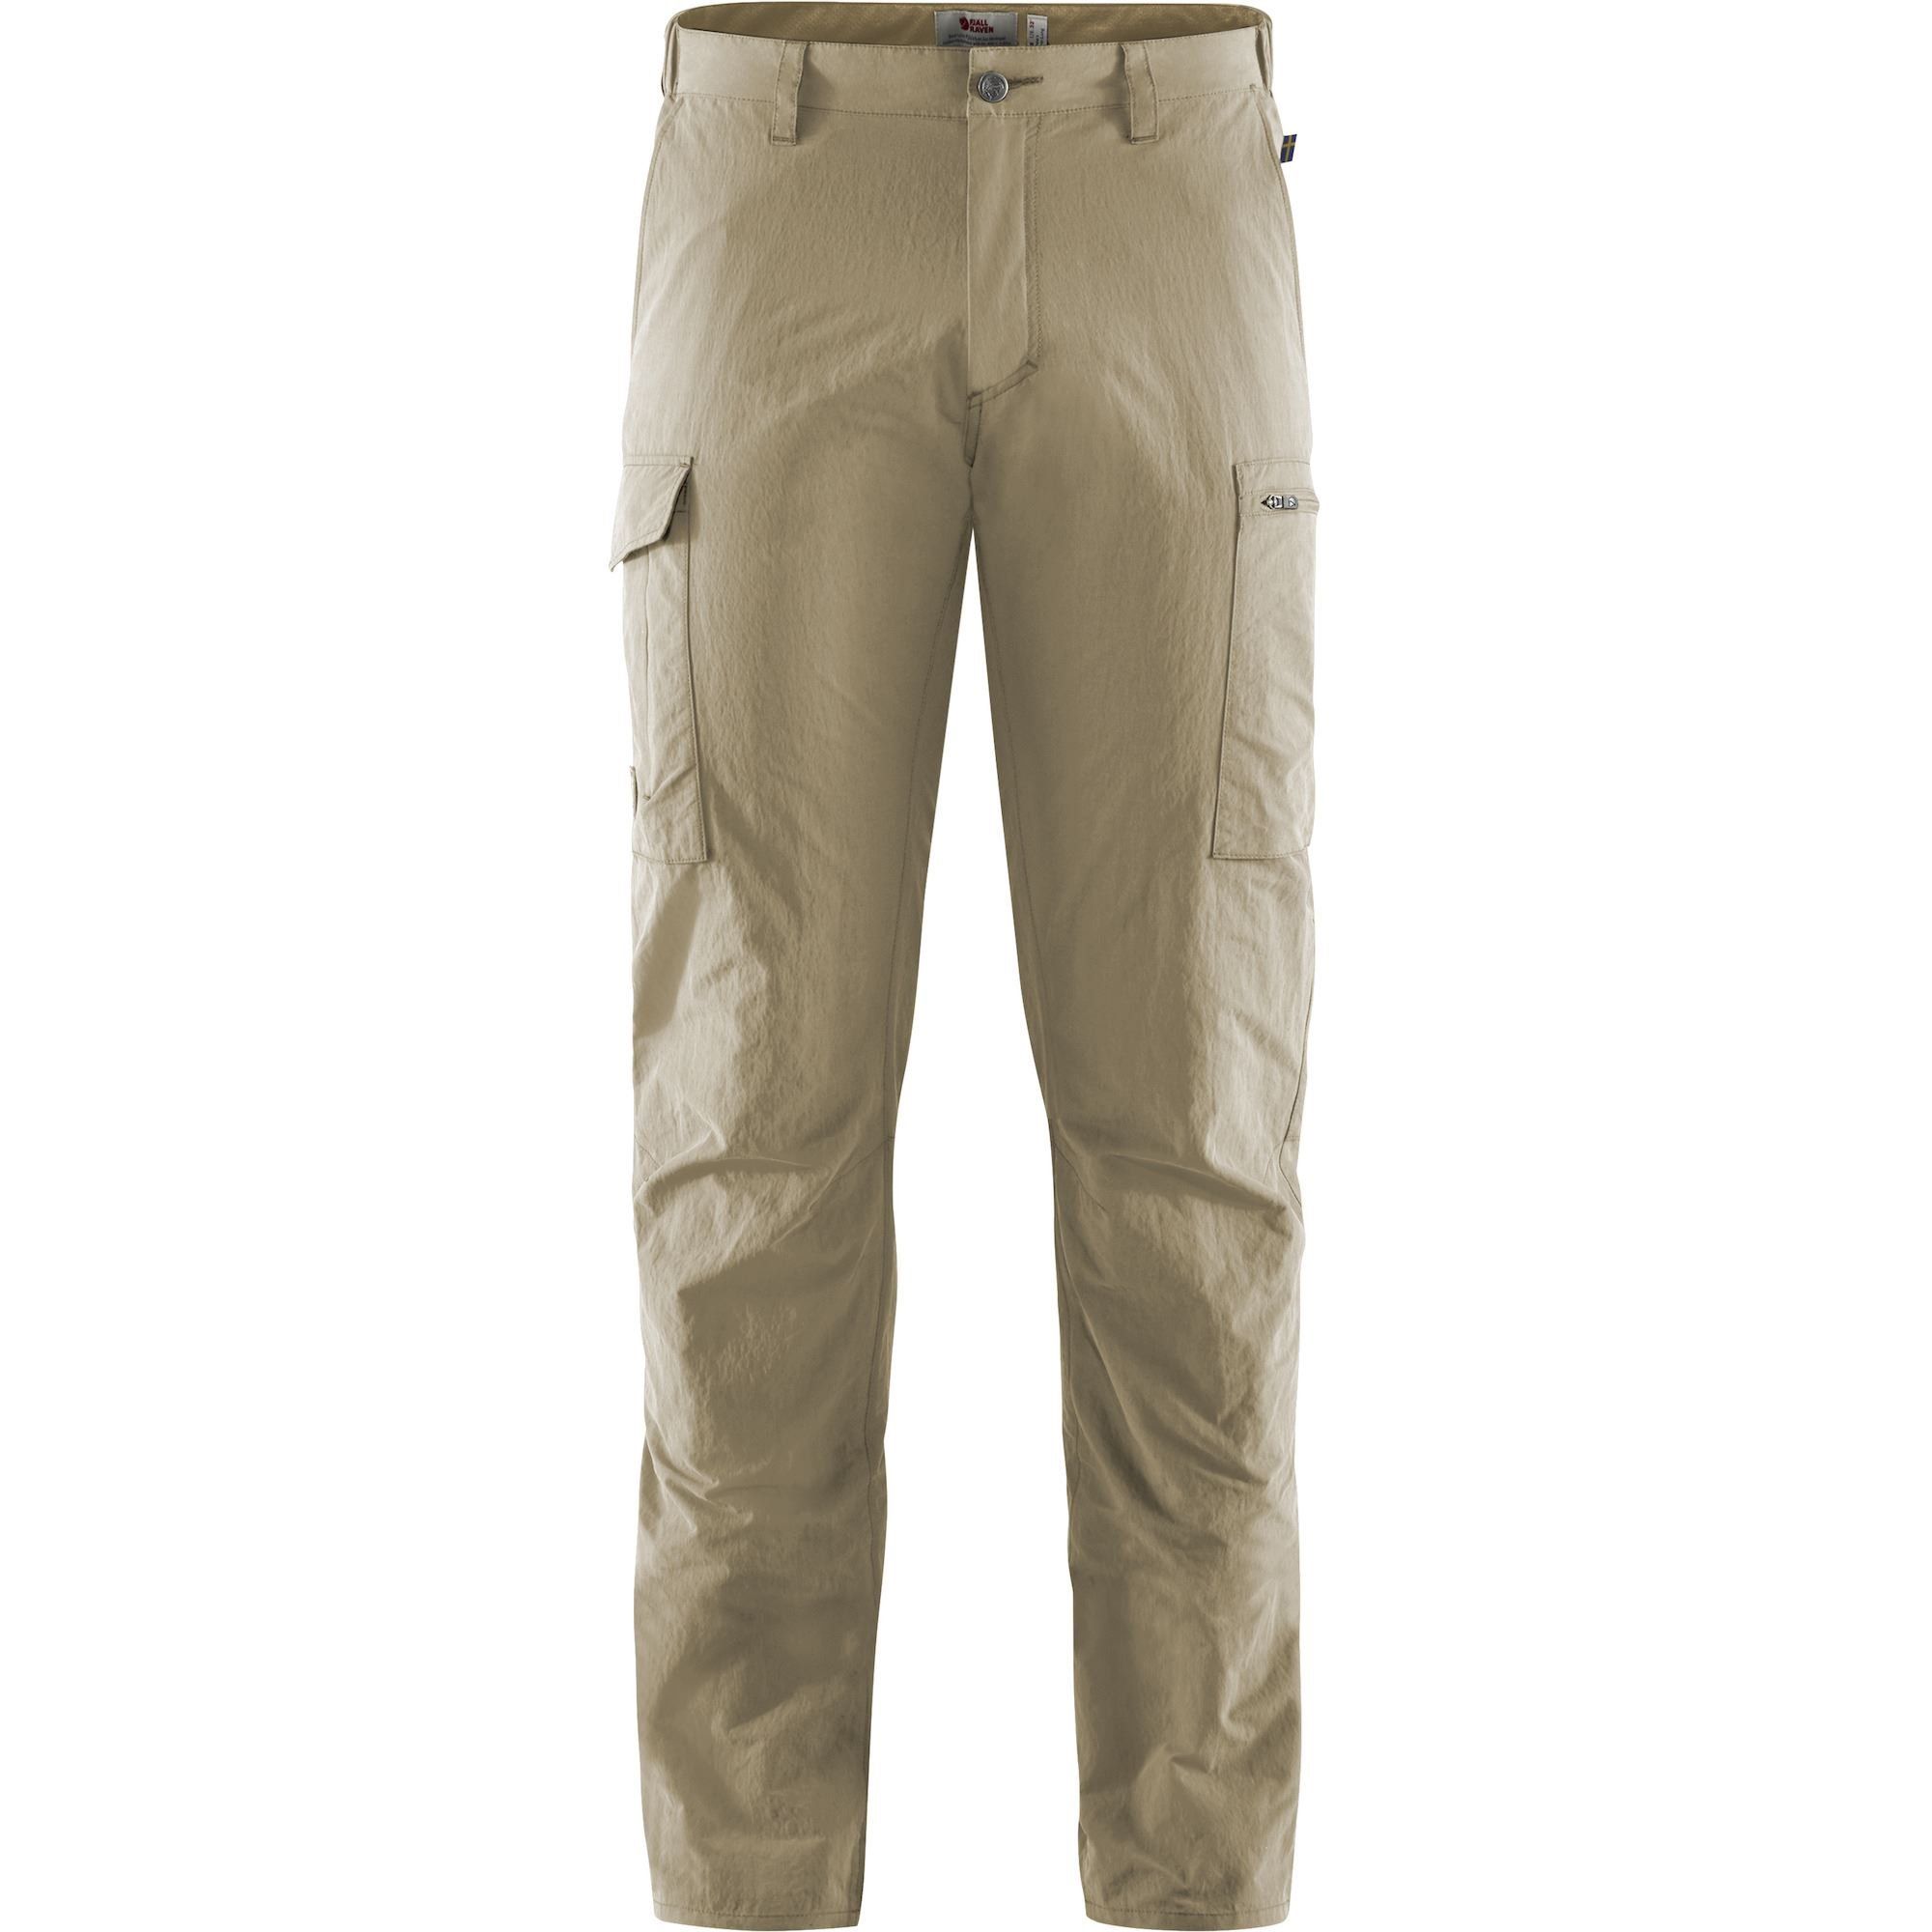 Fjaell Raeven - M's Travellers Mt Trousers